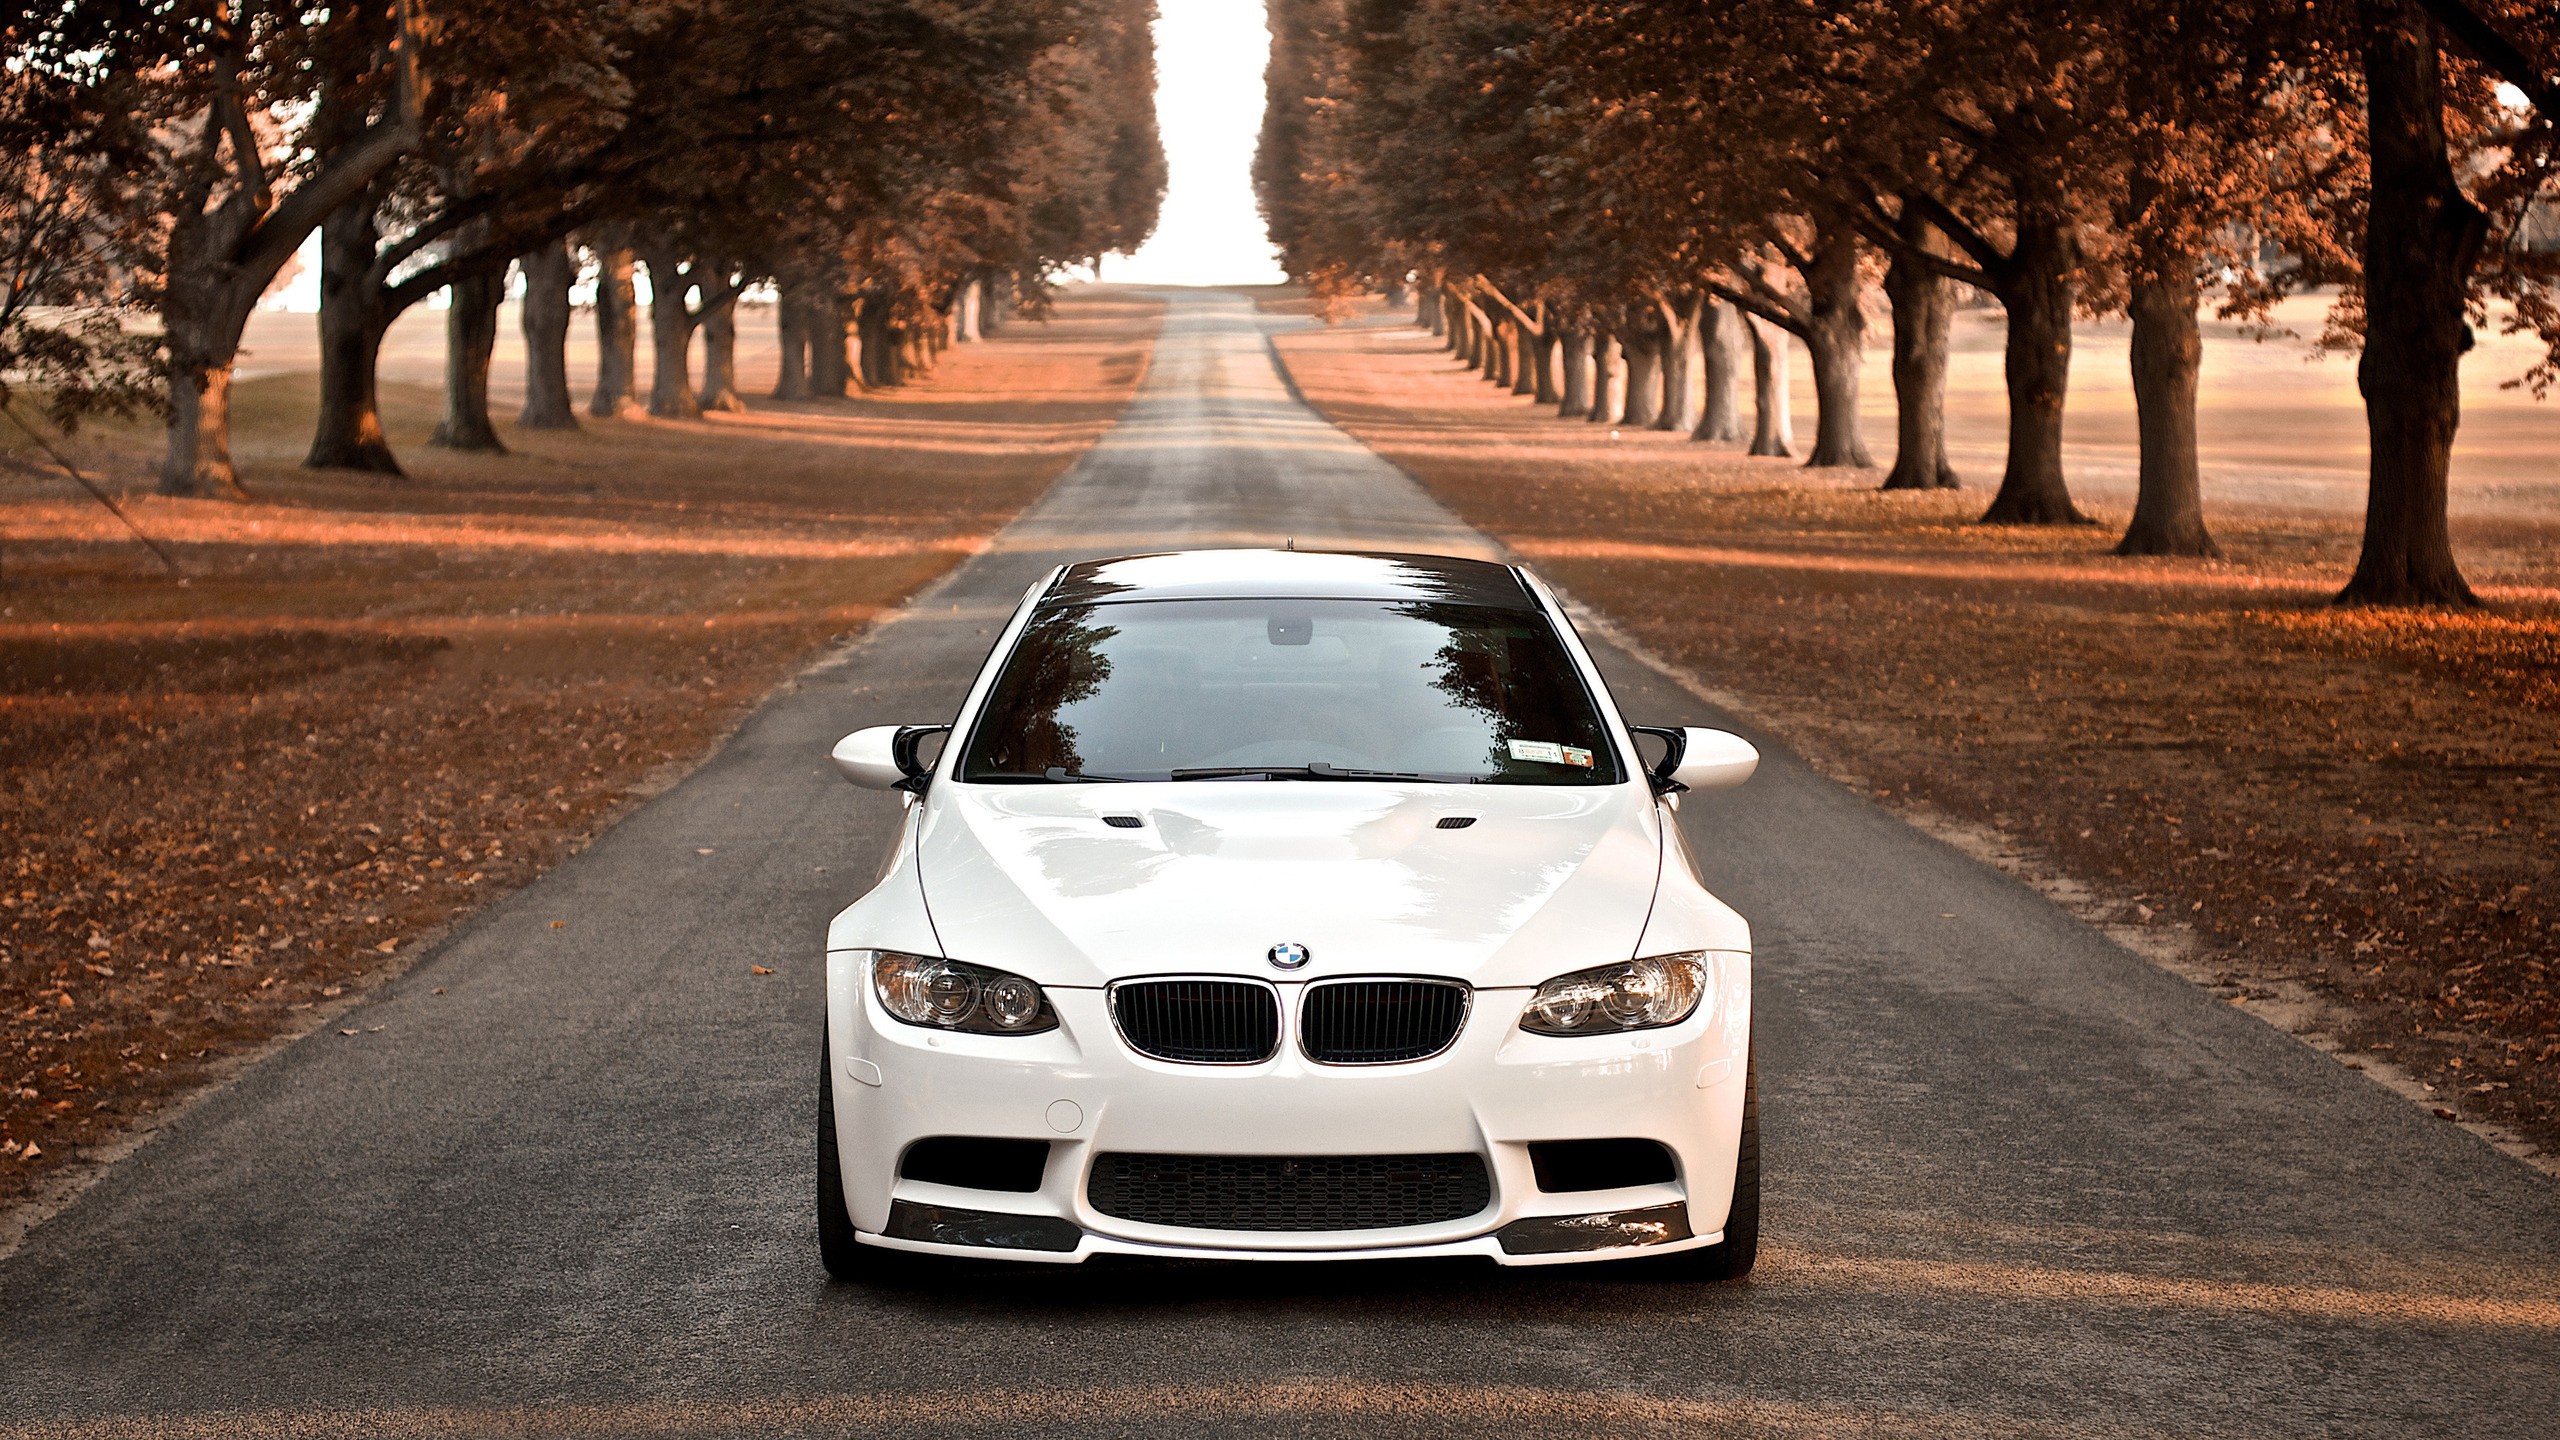 50 HD BMW Wallpapers/Backgrounds For